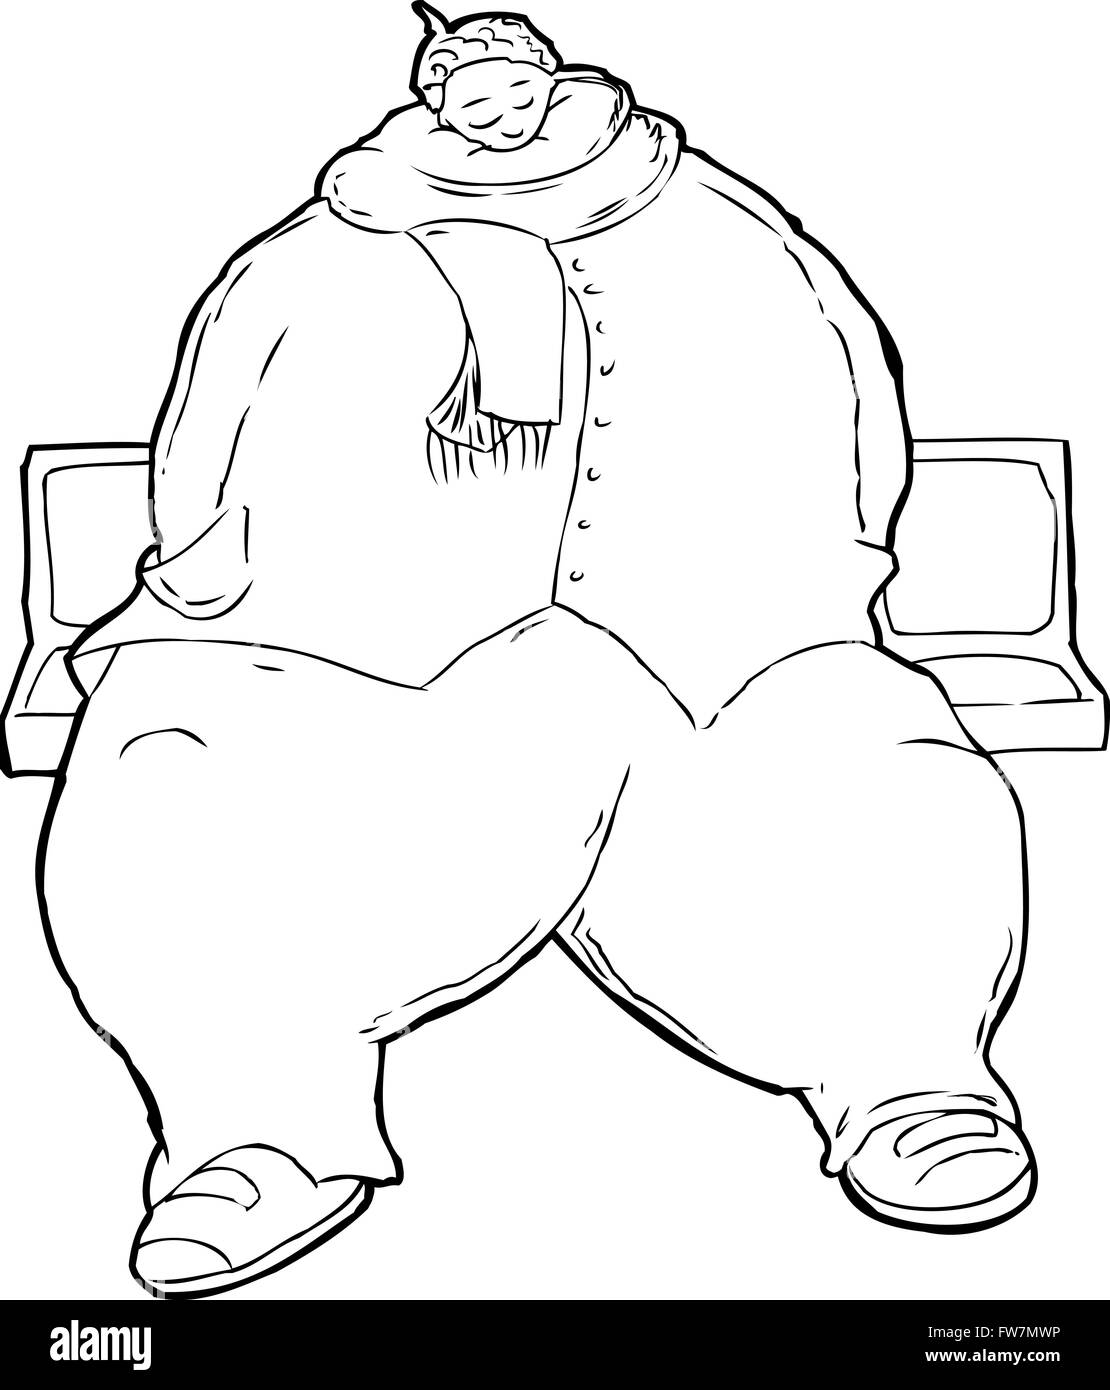 Outline of overweight Black woman sitting in row of bus or train seats Stock Photo